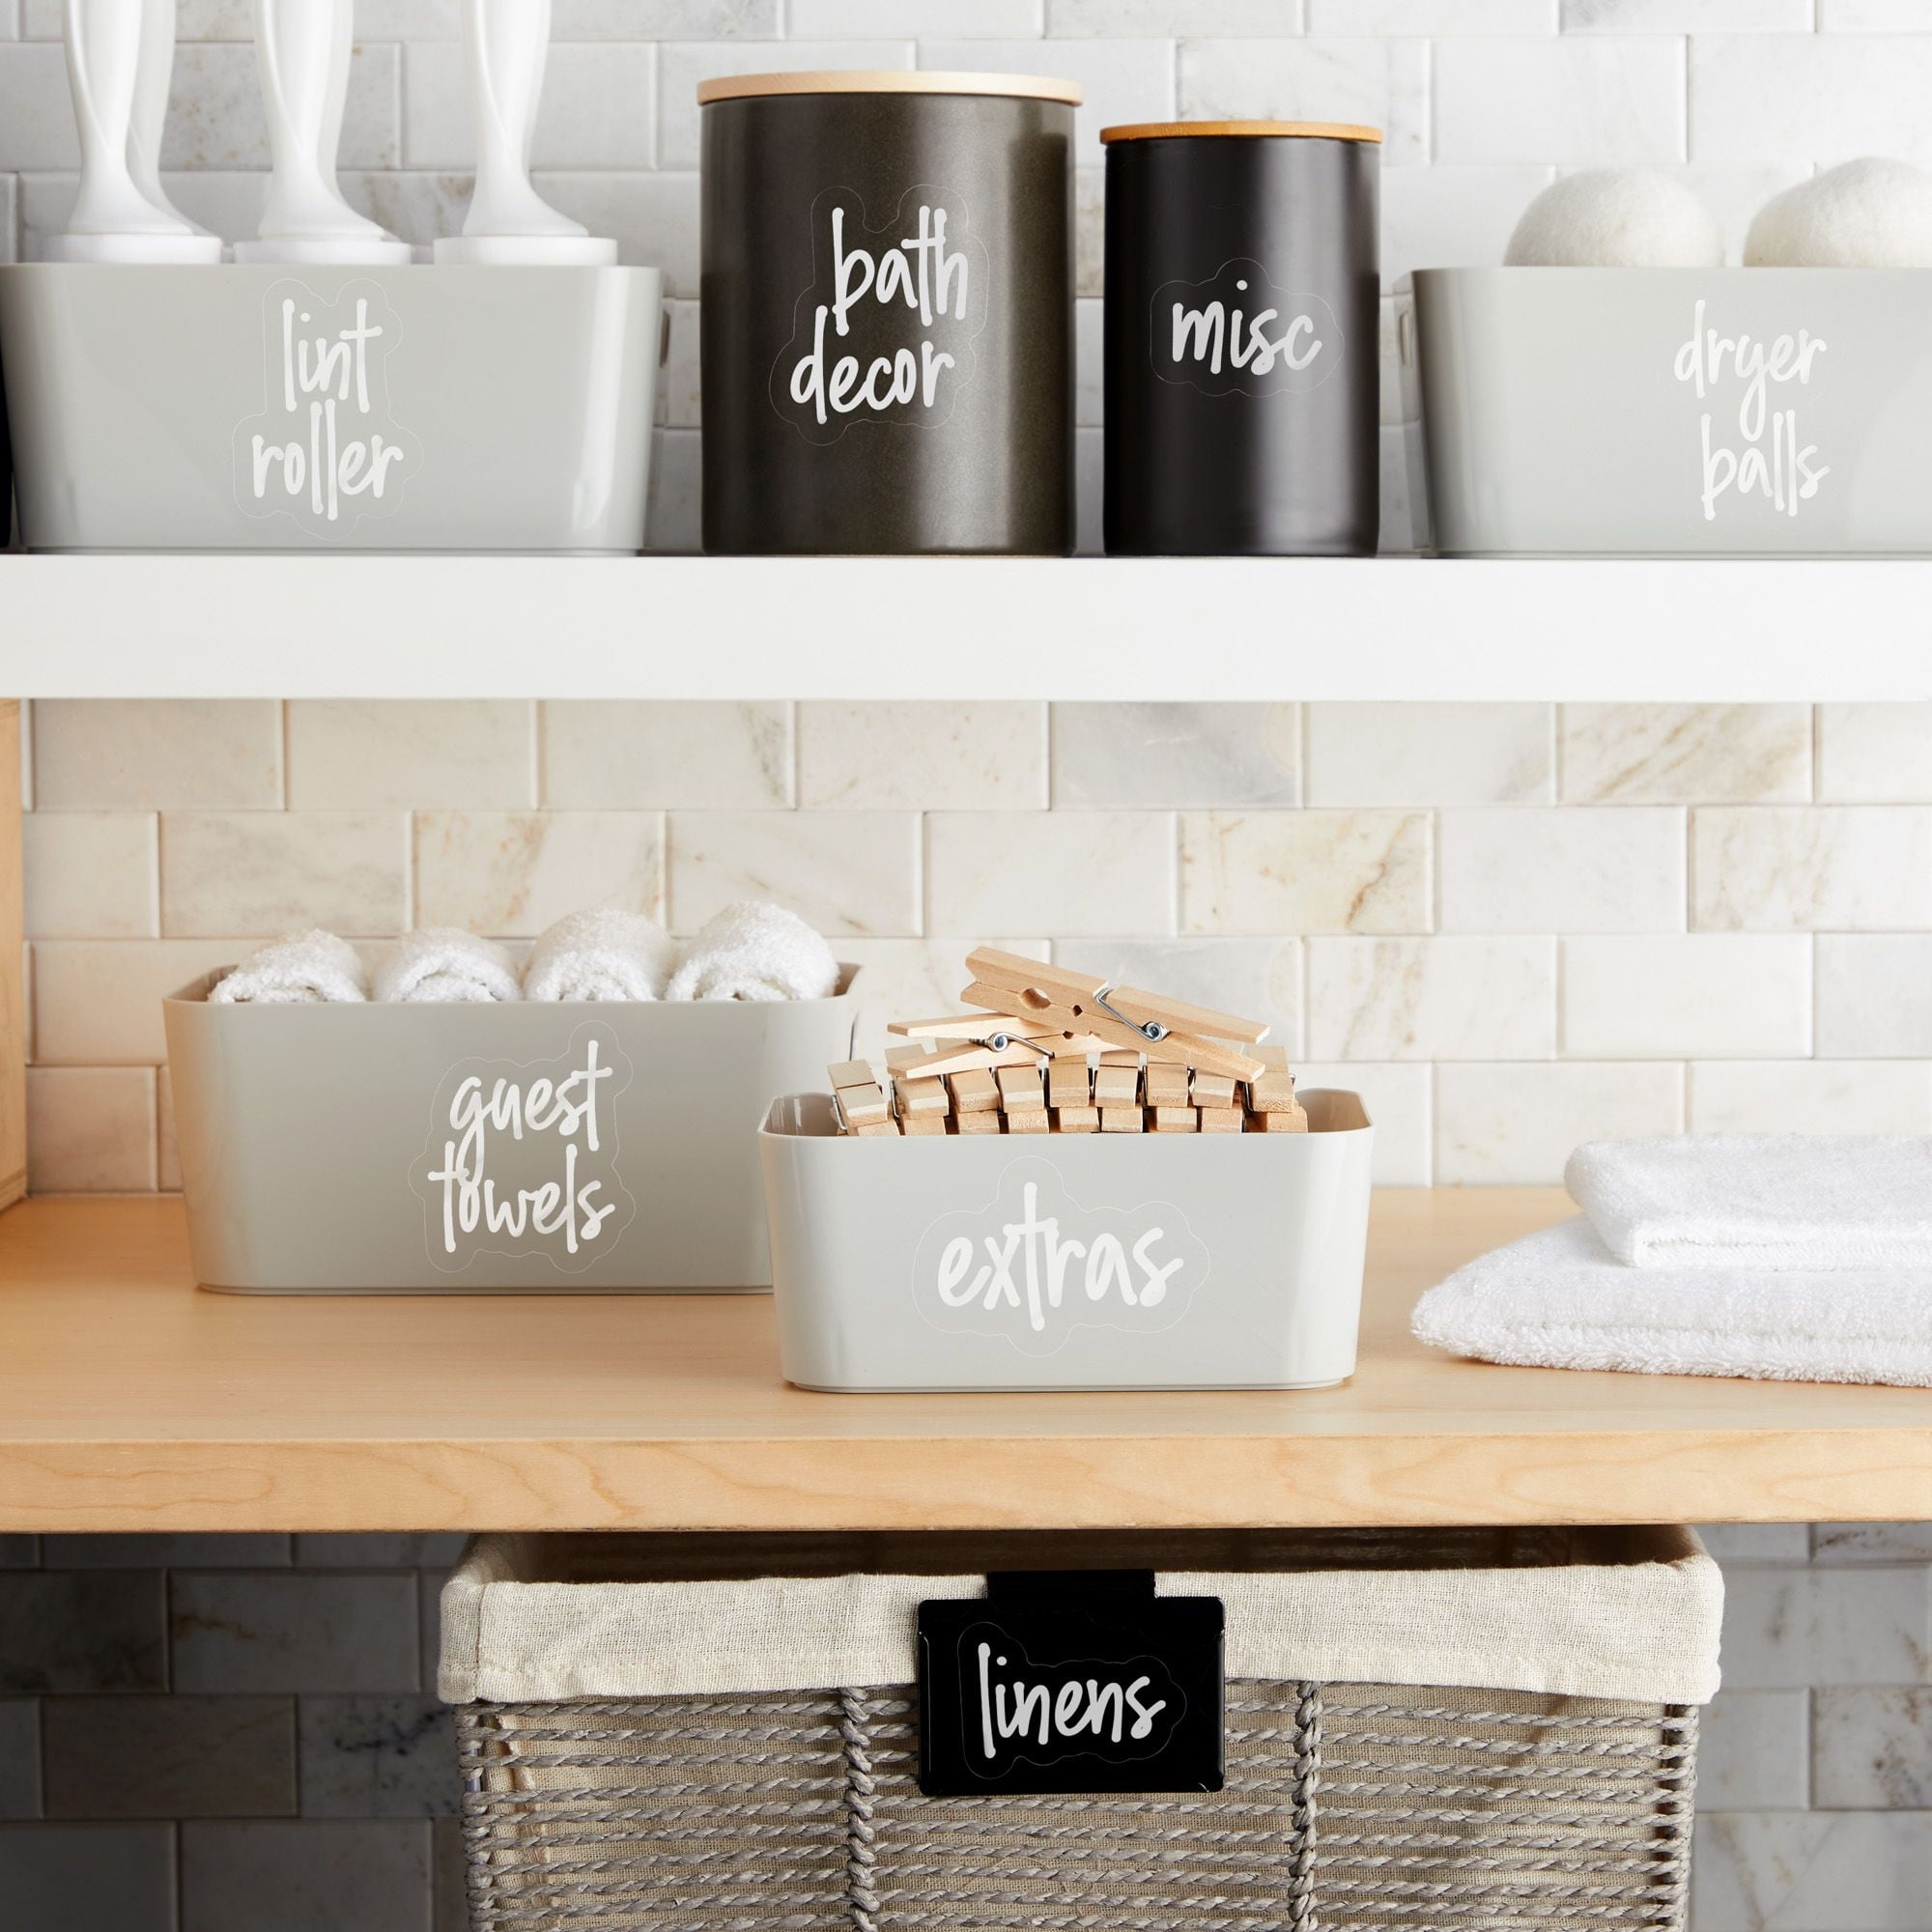 144 Minimalistic Laundry Room Labels for Glass Jars, Preprinted Linen  Closet Stickers for Containers, Bathroom Organization - On Sale - Bed Bath  & Beyond - 38239842